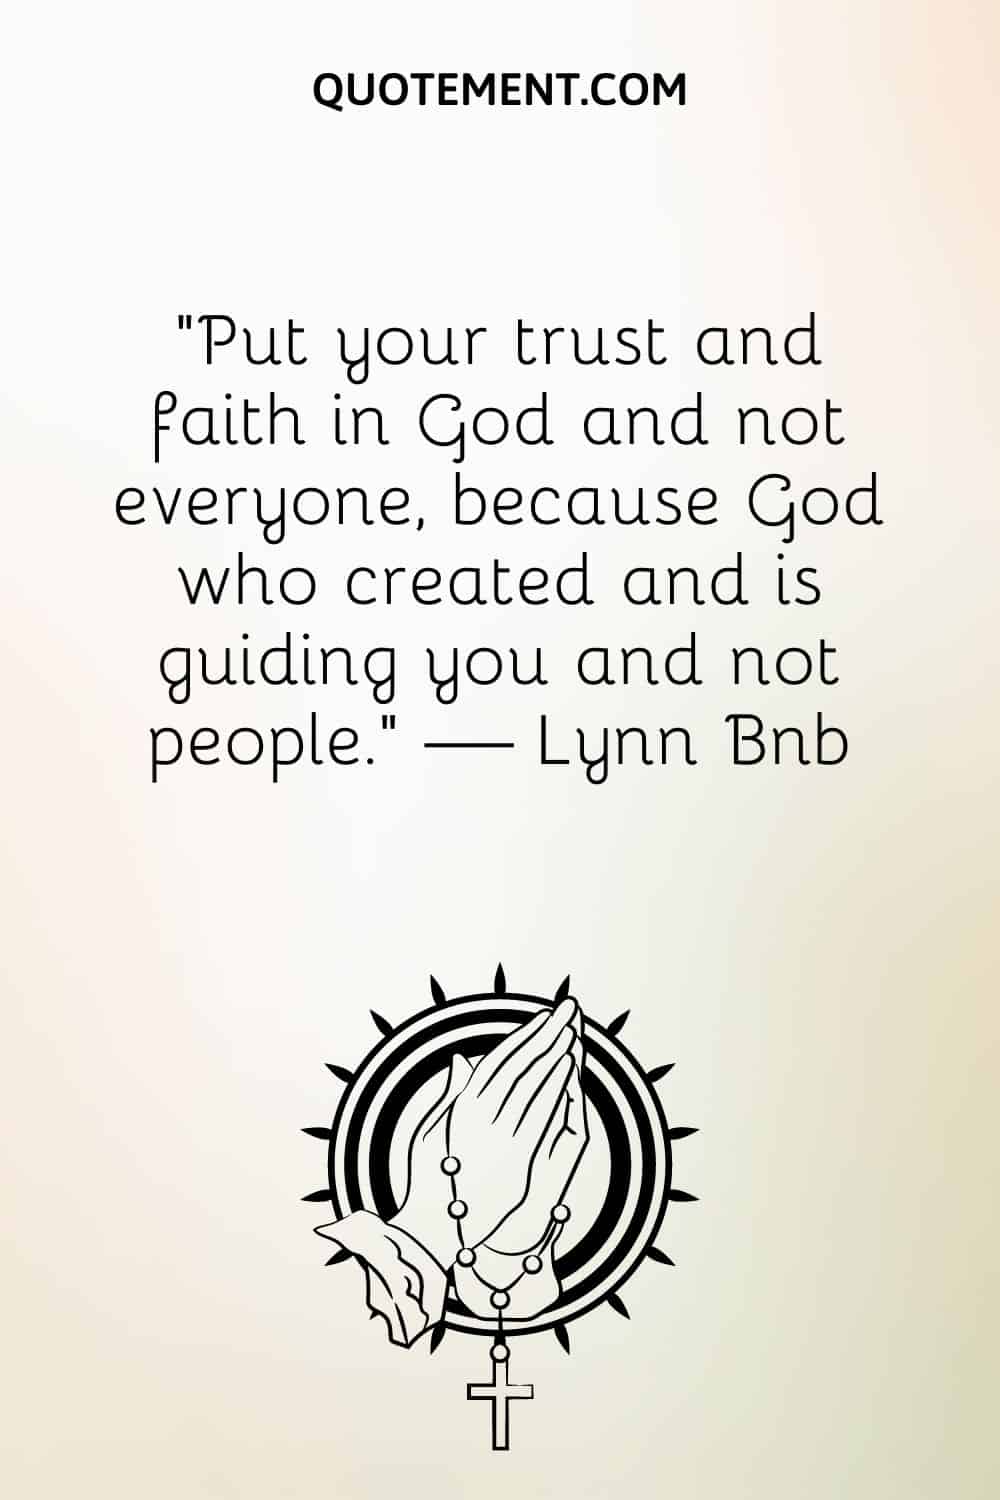 Put your trust and faith in God and not everyone, because God who created and is guiding you and not people